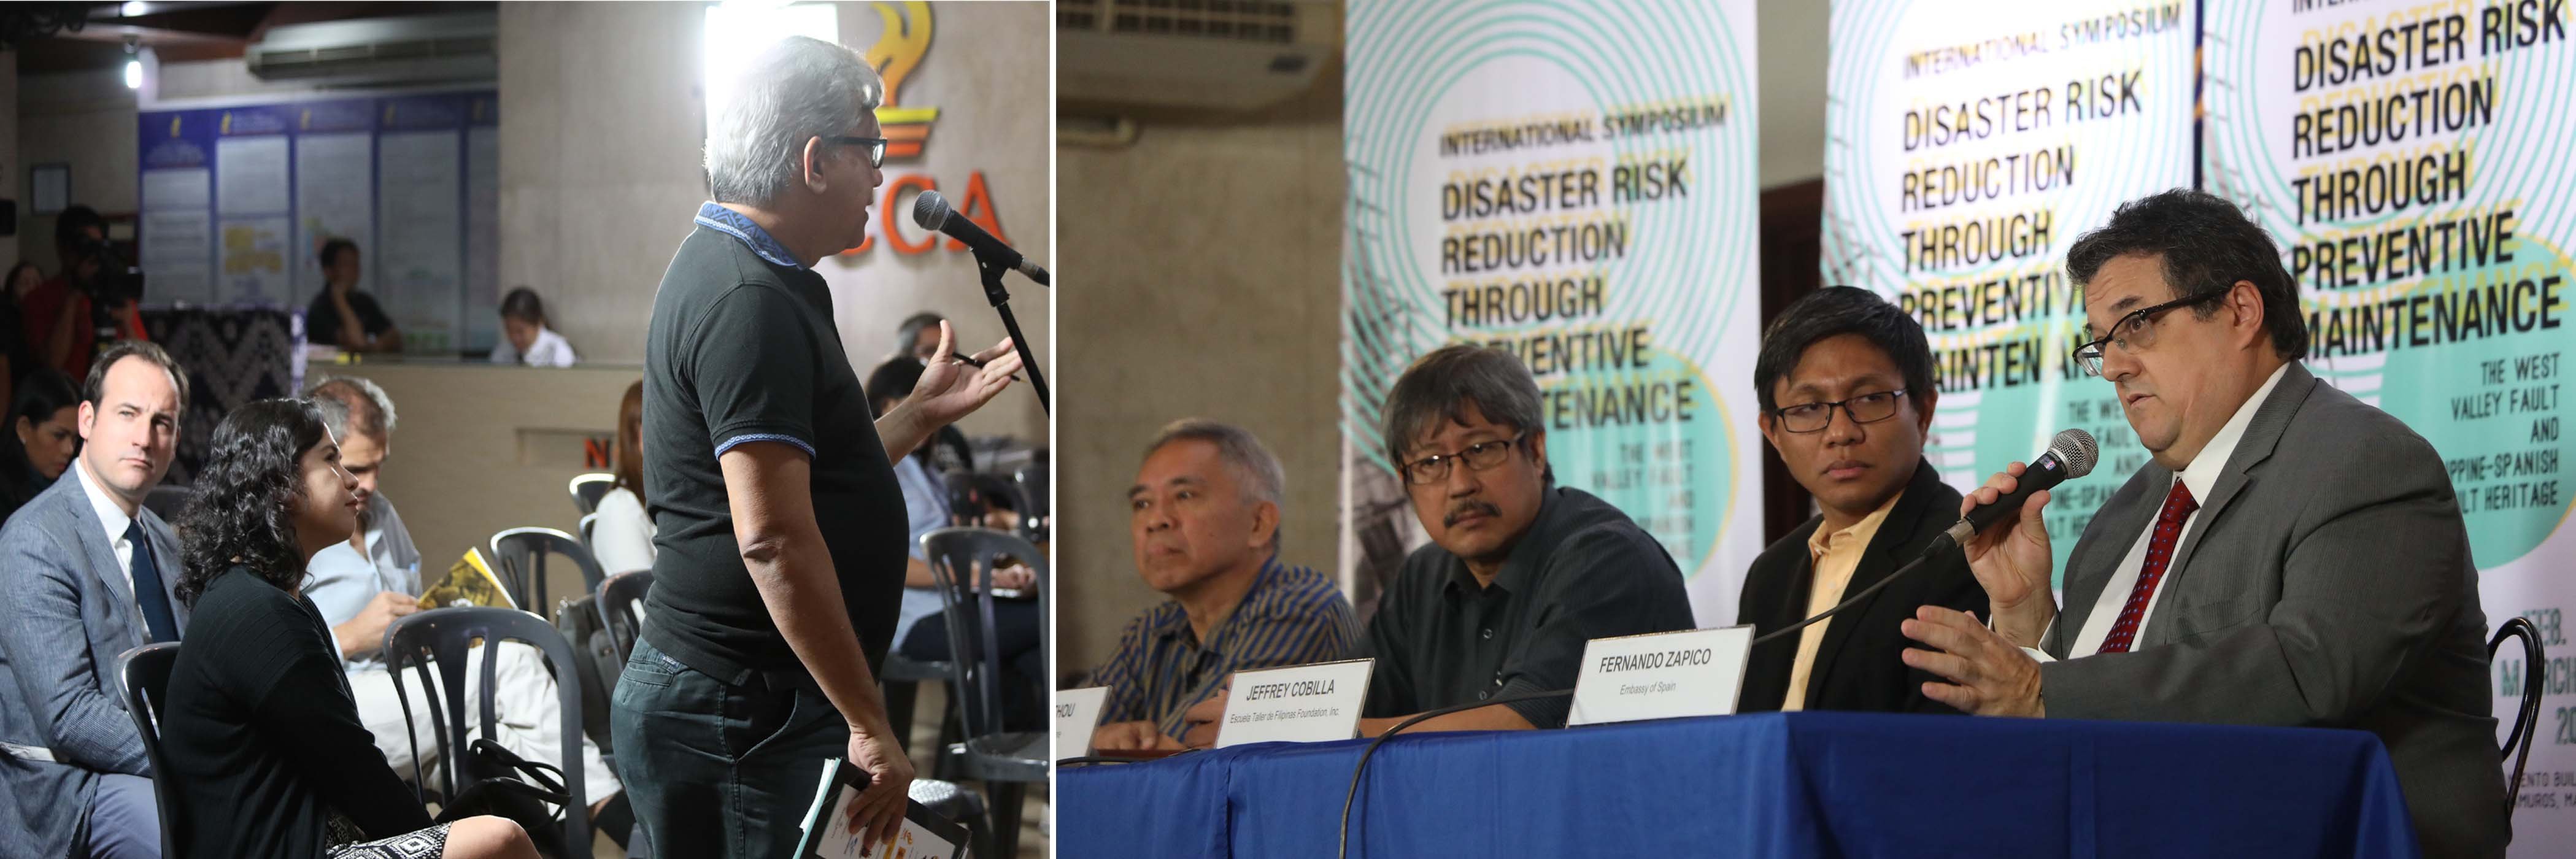 Int'l experts meet on disaster risk reduction of heritage sites